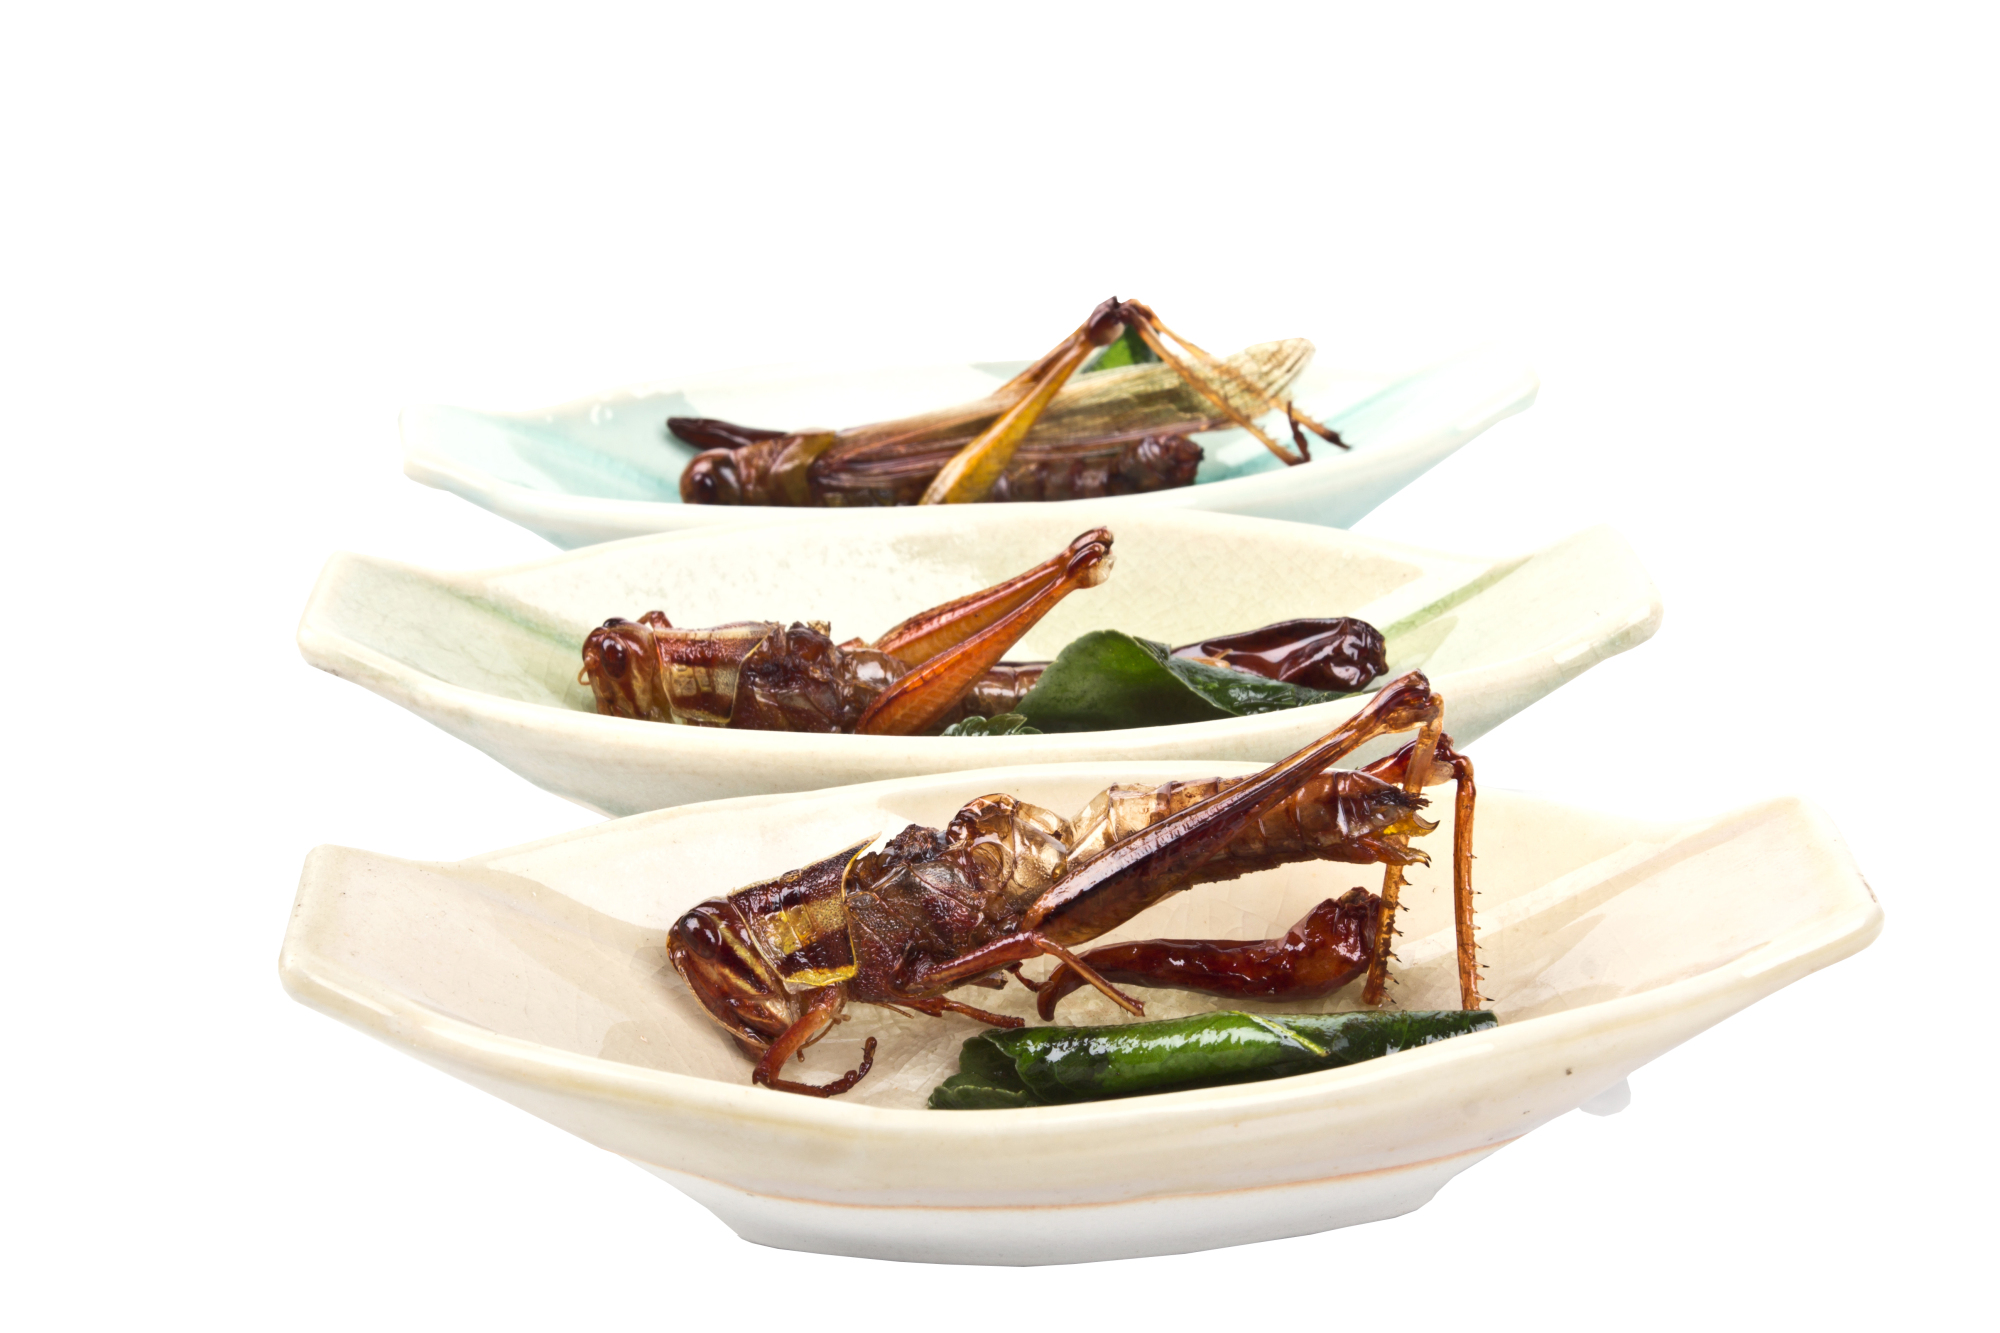 Food bugs: Insects such as locusts could become an alternative food source as Japan's traditional ones become scarce. | ISTOCK